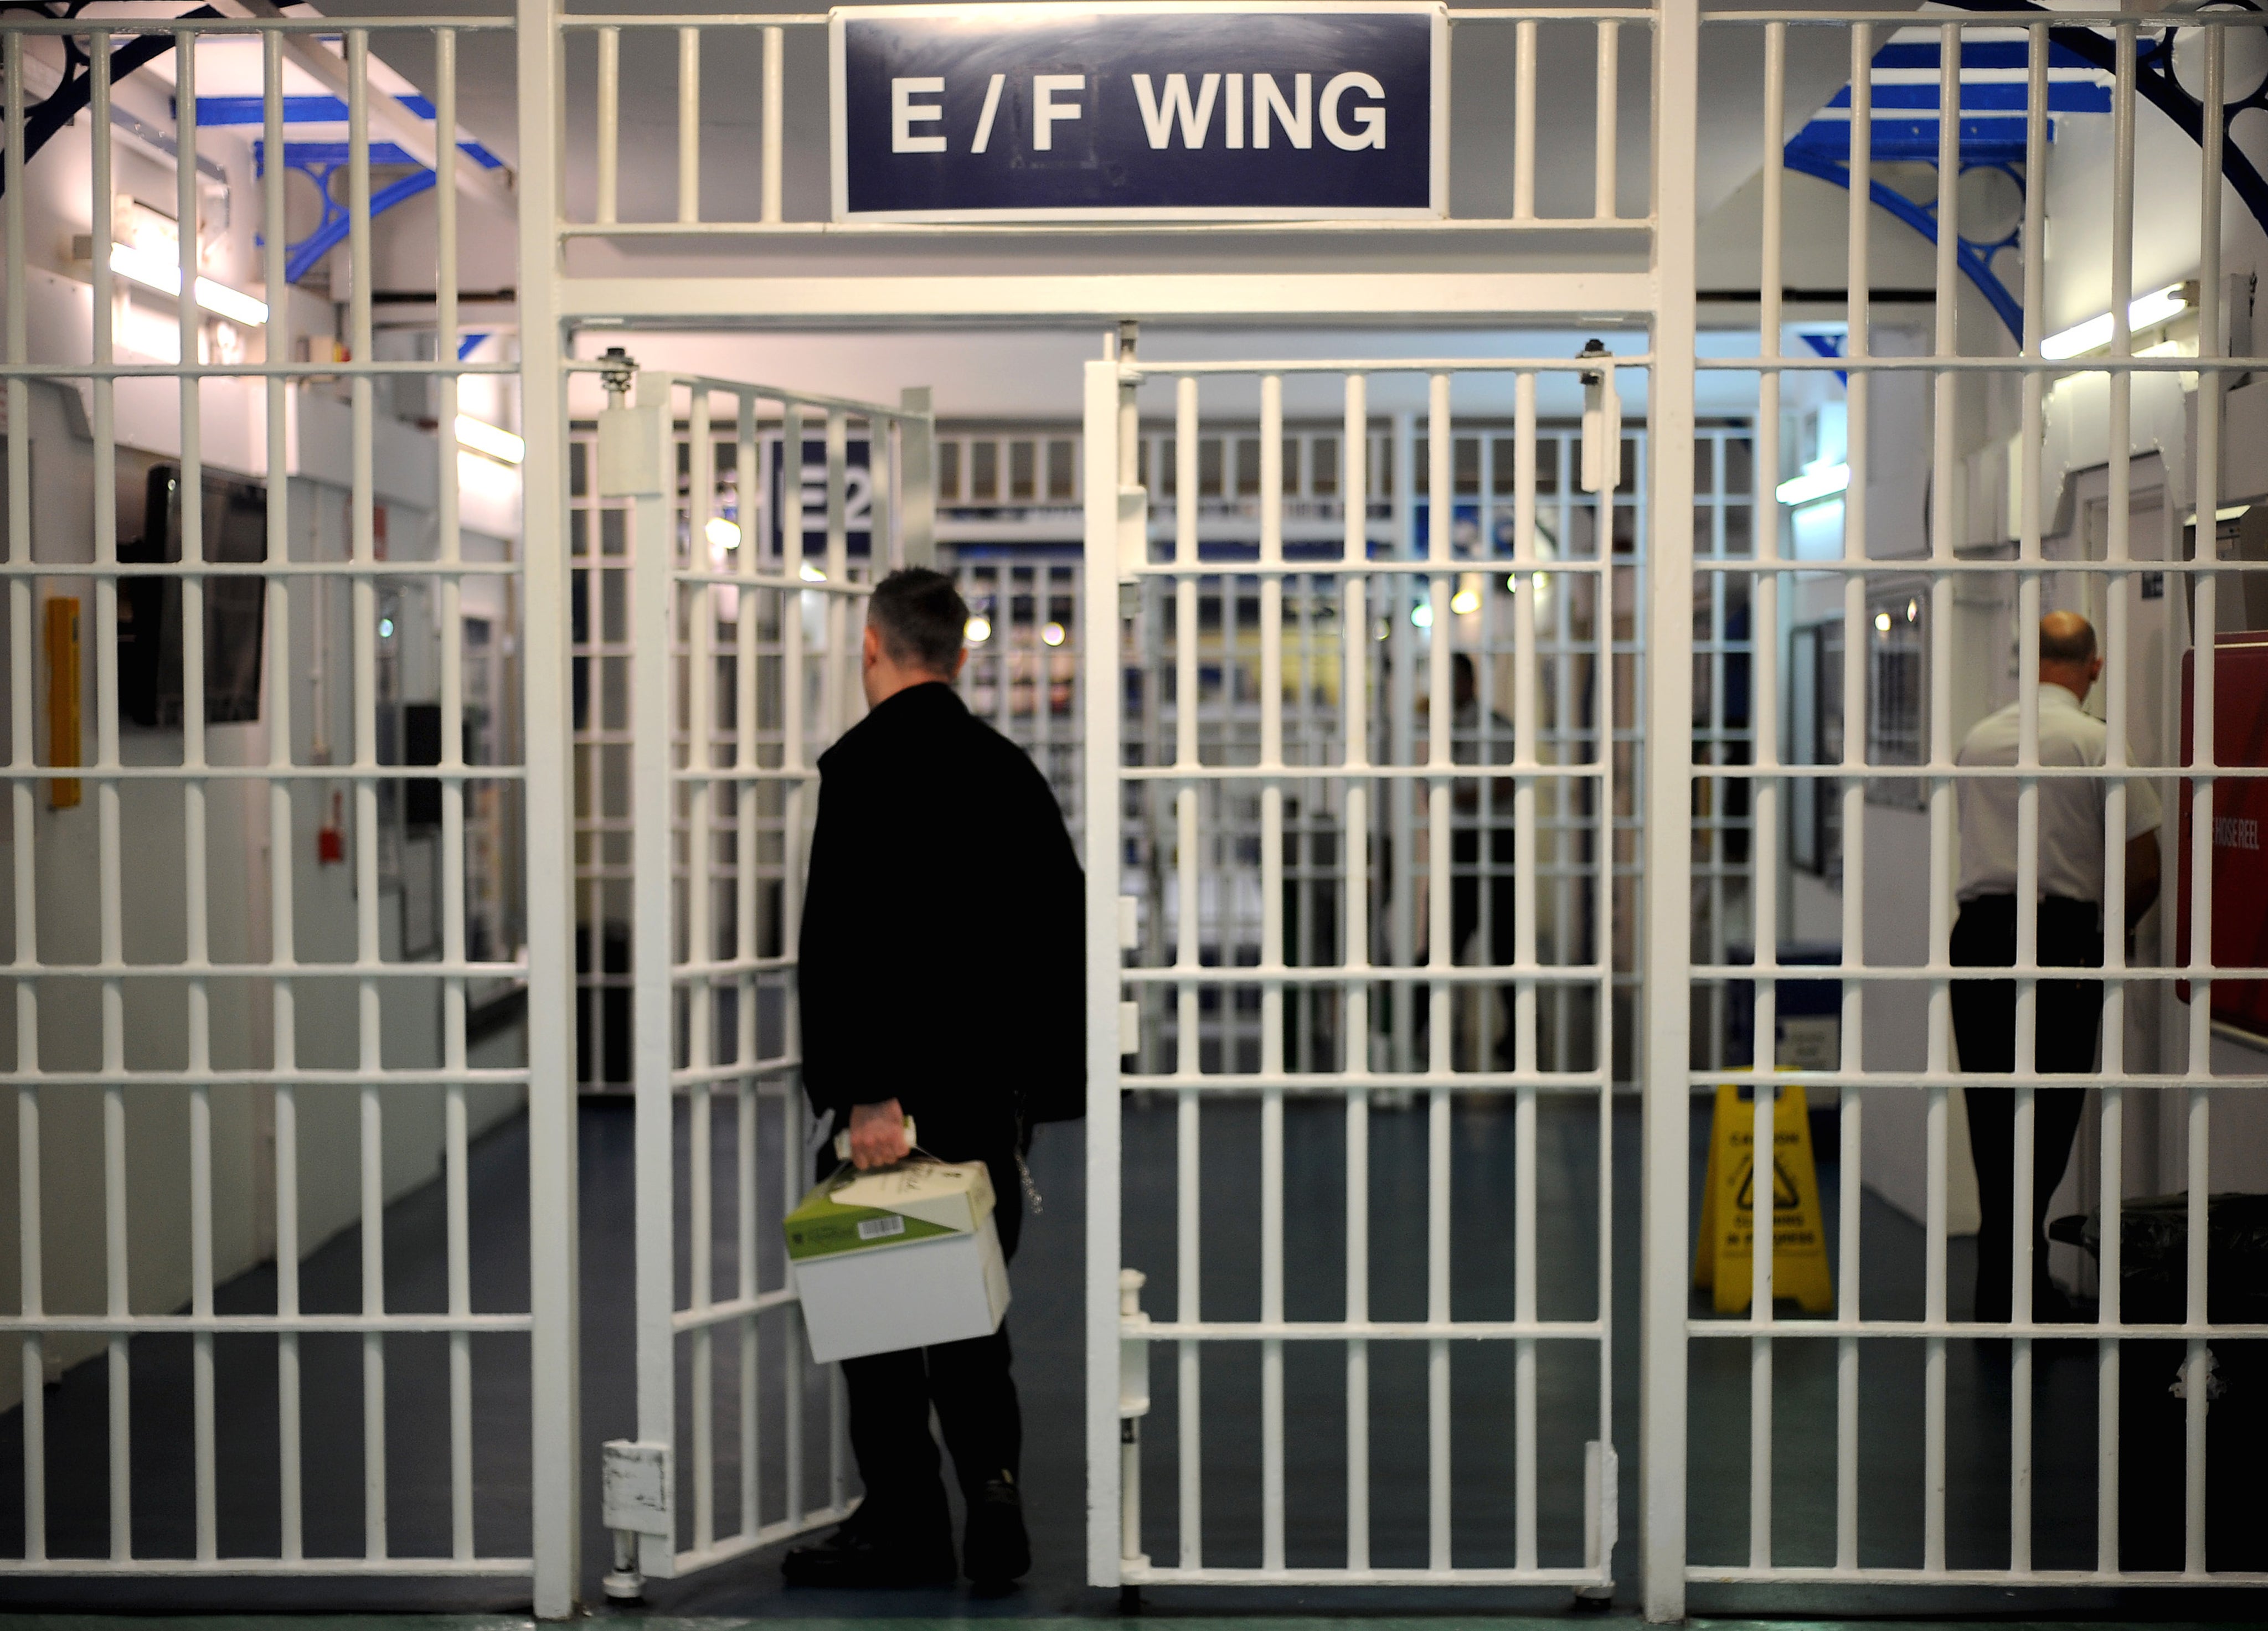 The Justice Secretary has backed calls for independent investigations into prisoner deaths (Anthony Devlin/PA)